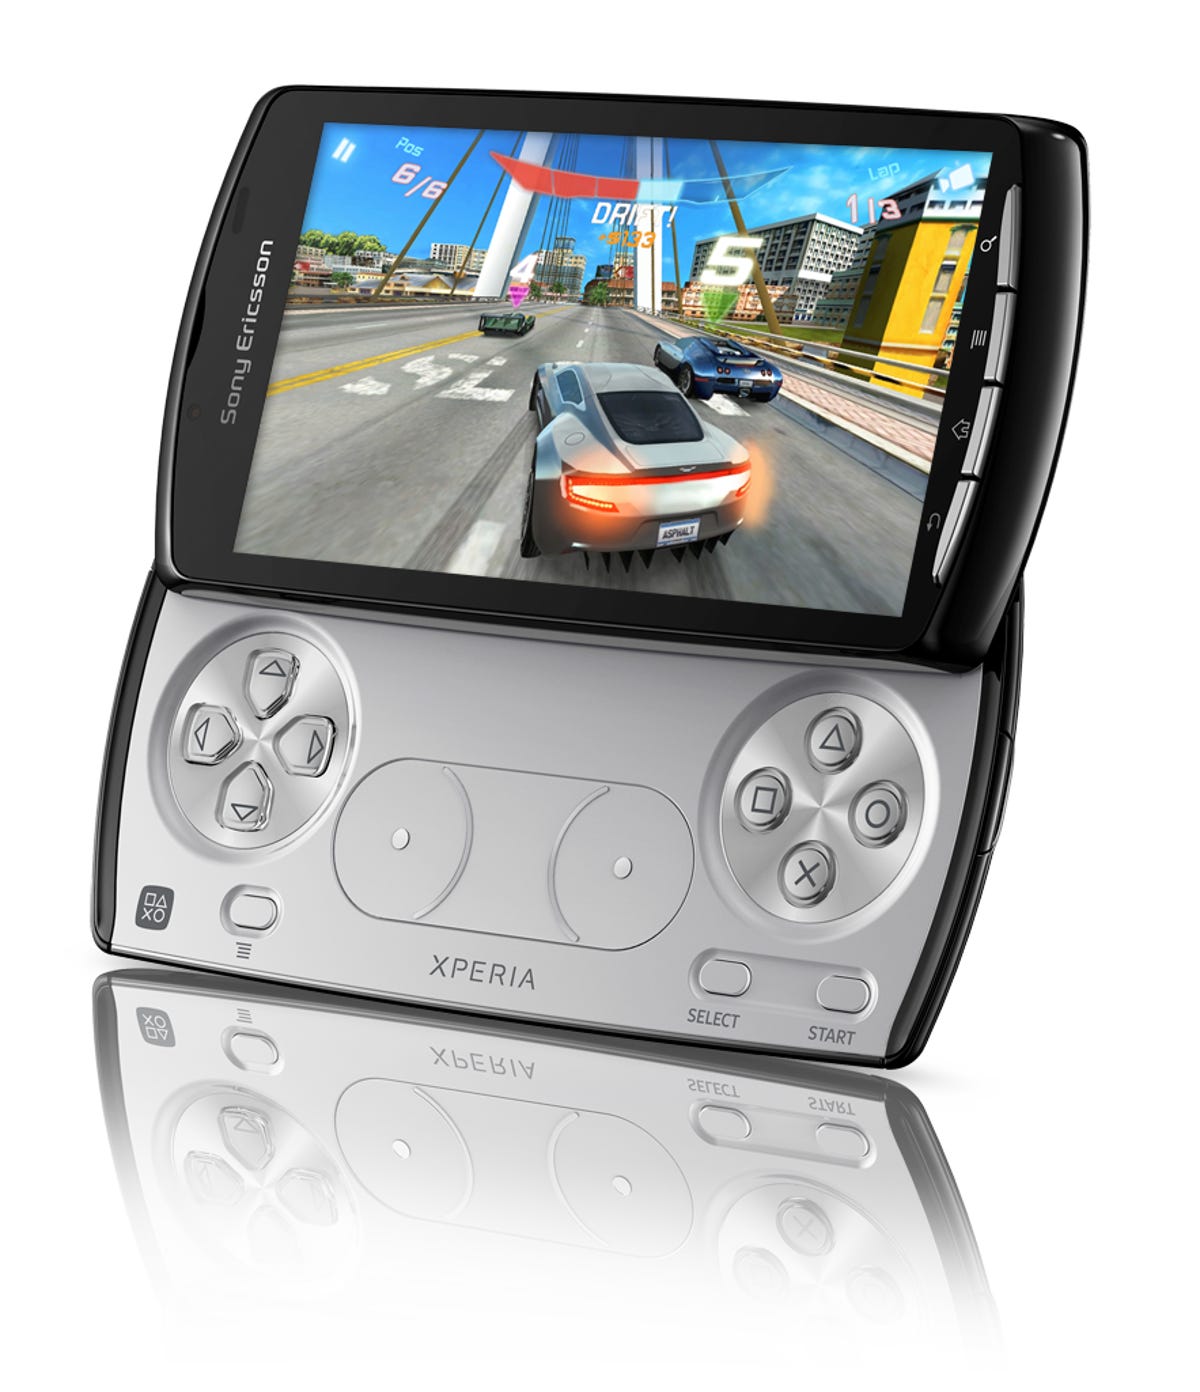 Xperia Play: don't call it a PSP.